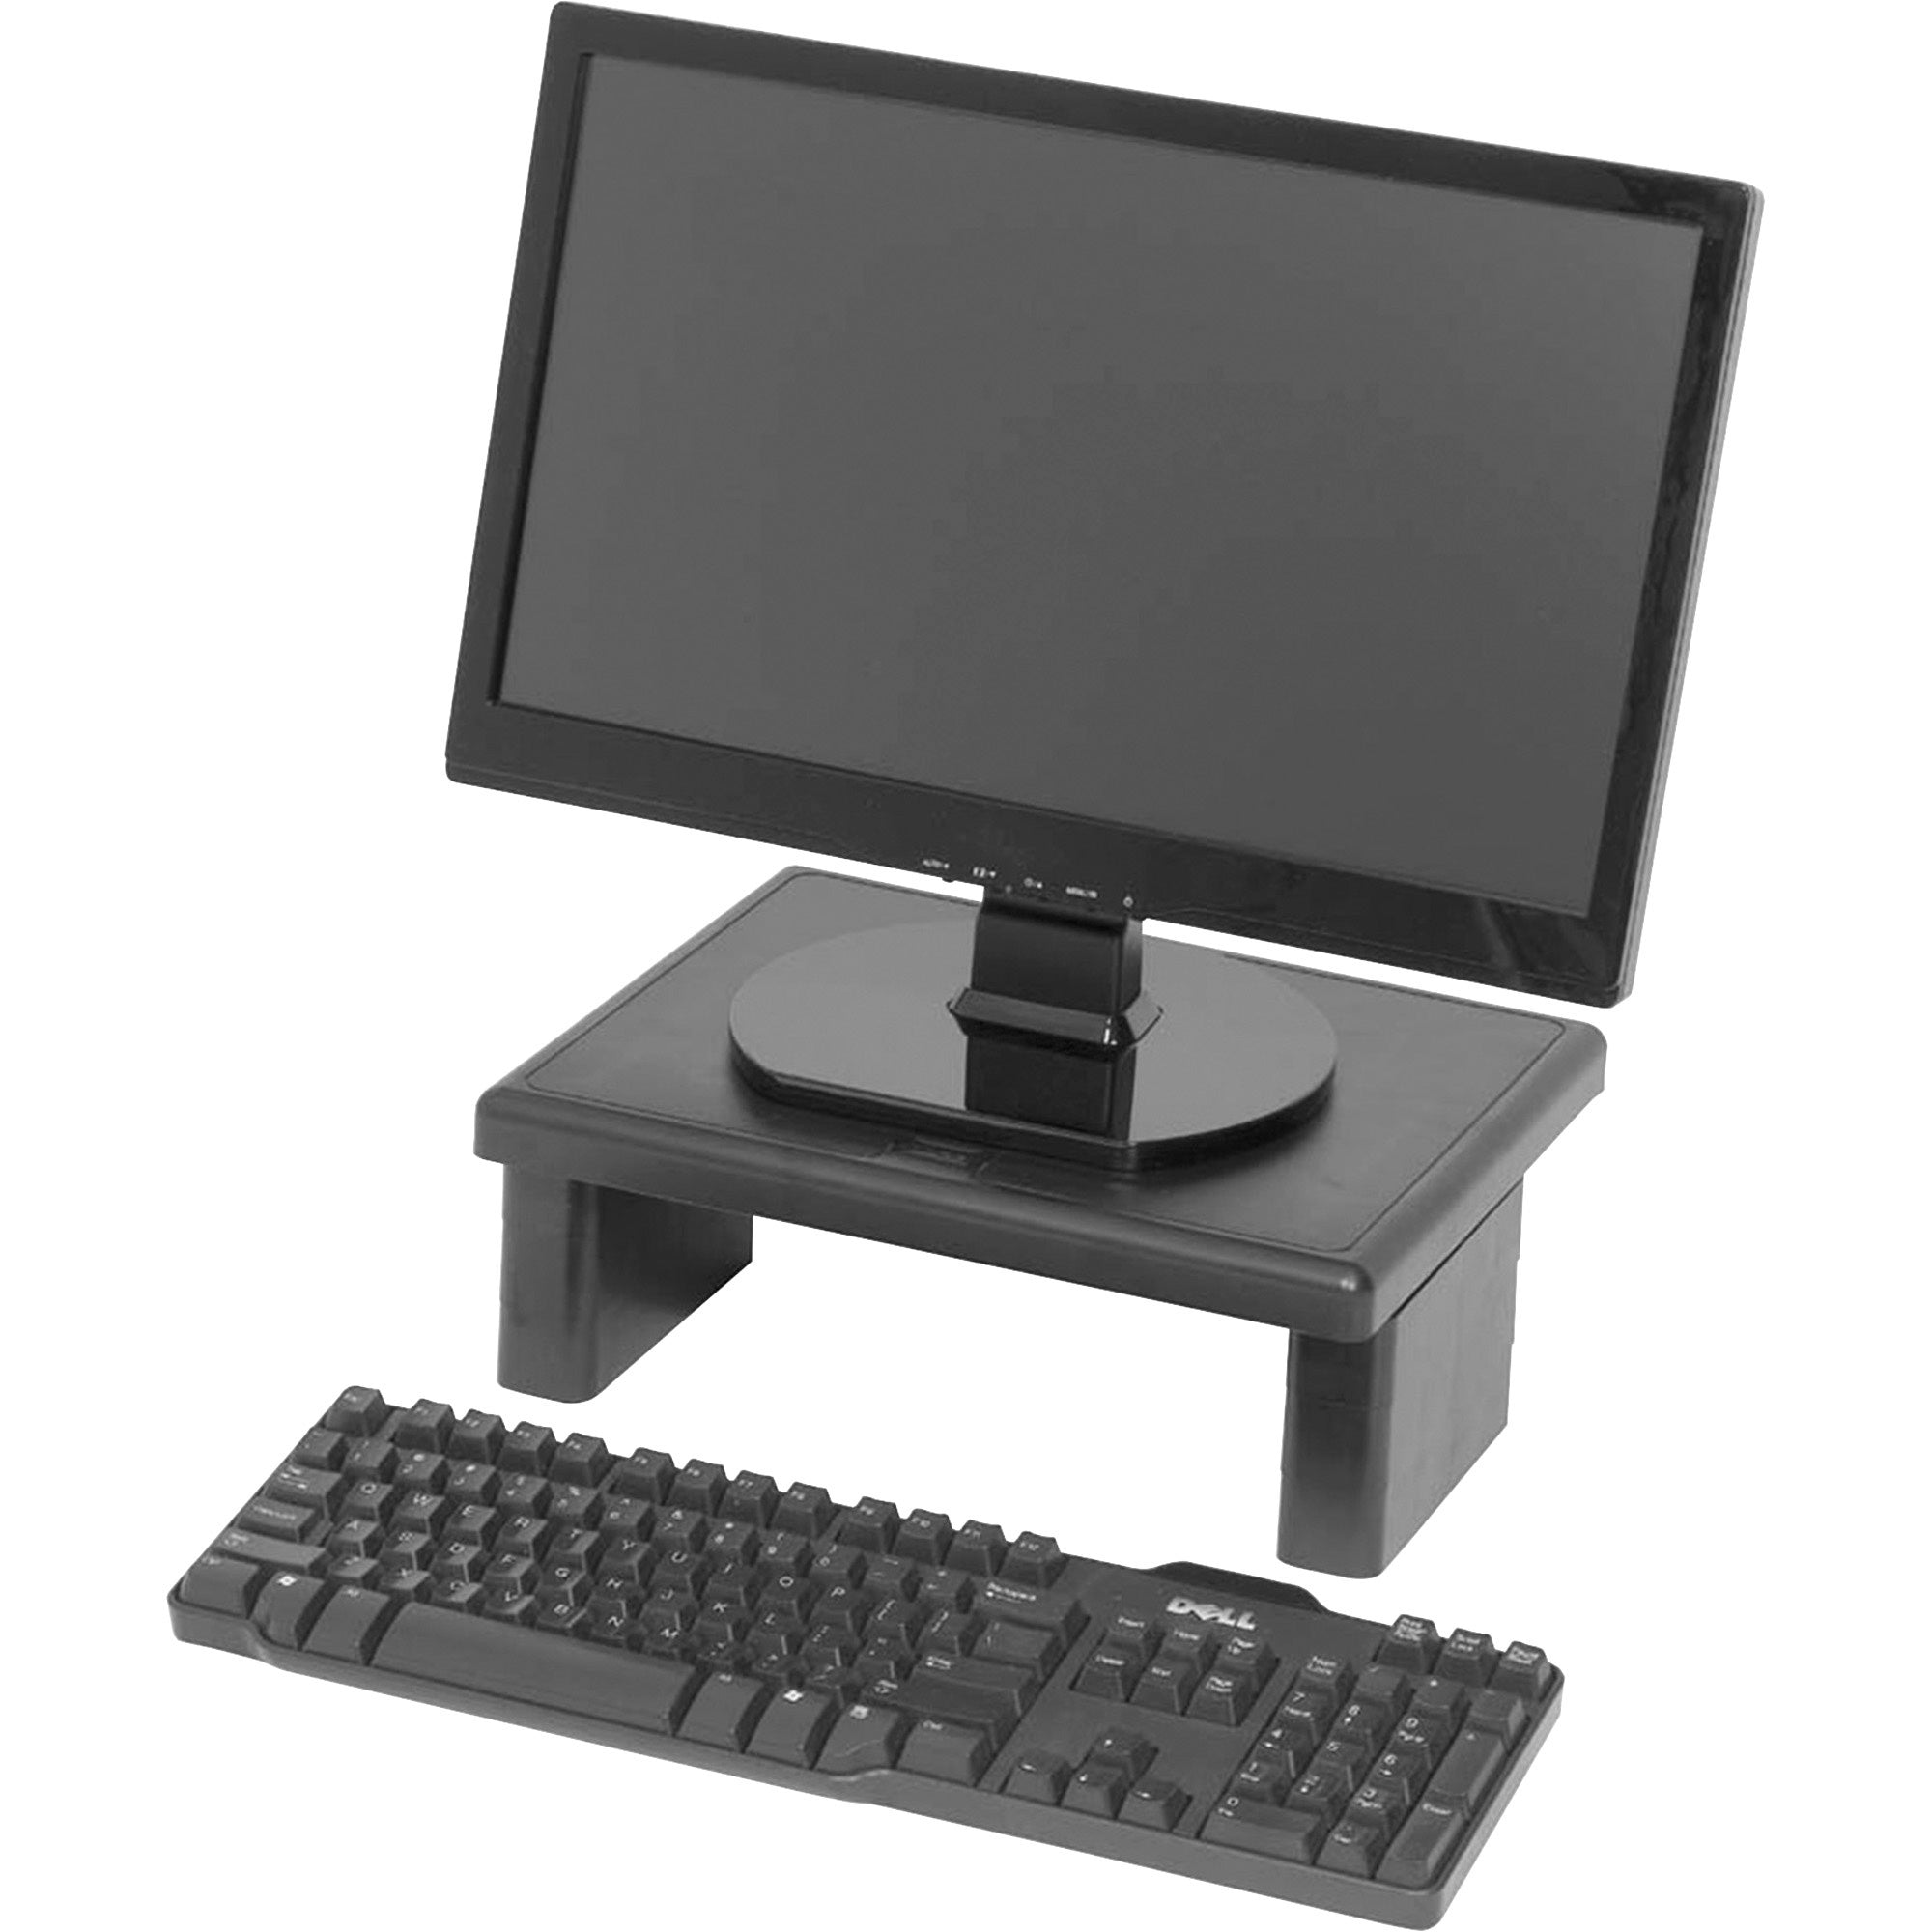 DAC Height Adjustable LCD/TFT Monitor Riser - 66 lb Load Capacity - Flat Panel Display Type Supported - 4.8" Height x 13" Width x 10.5" Depth - Black - 